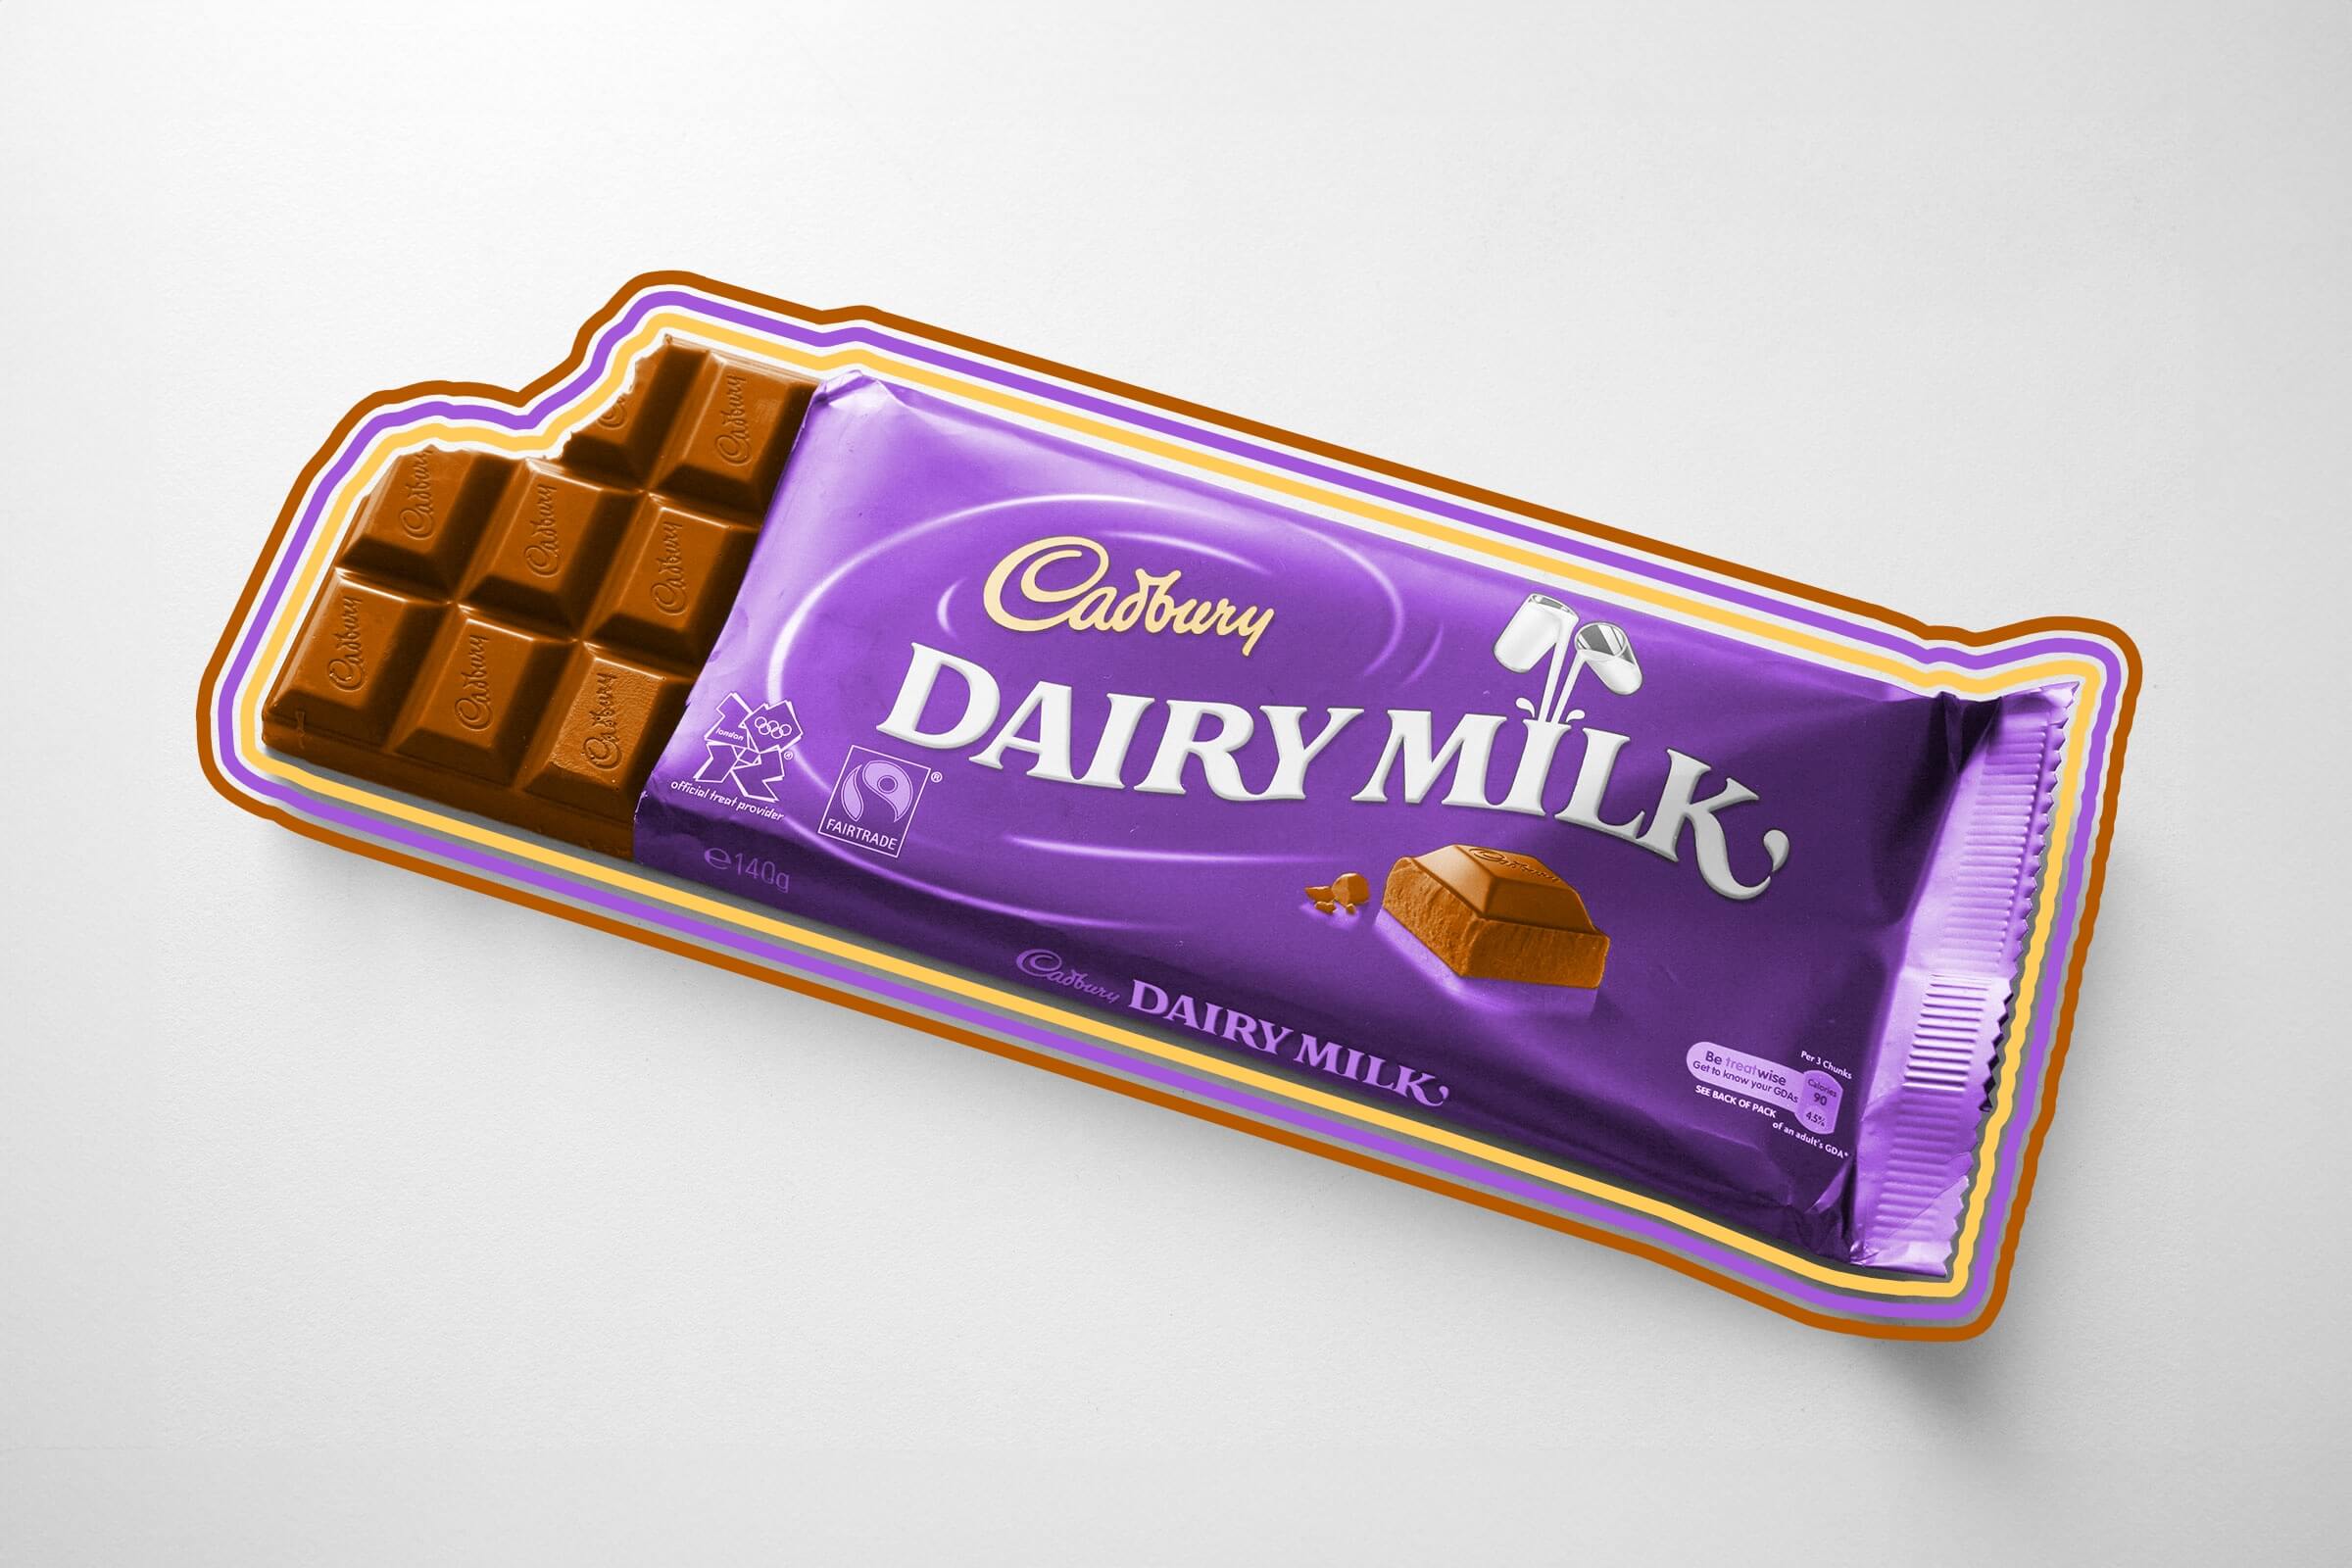 A chocolate bar sold at auction for almost $700.